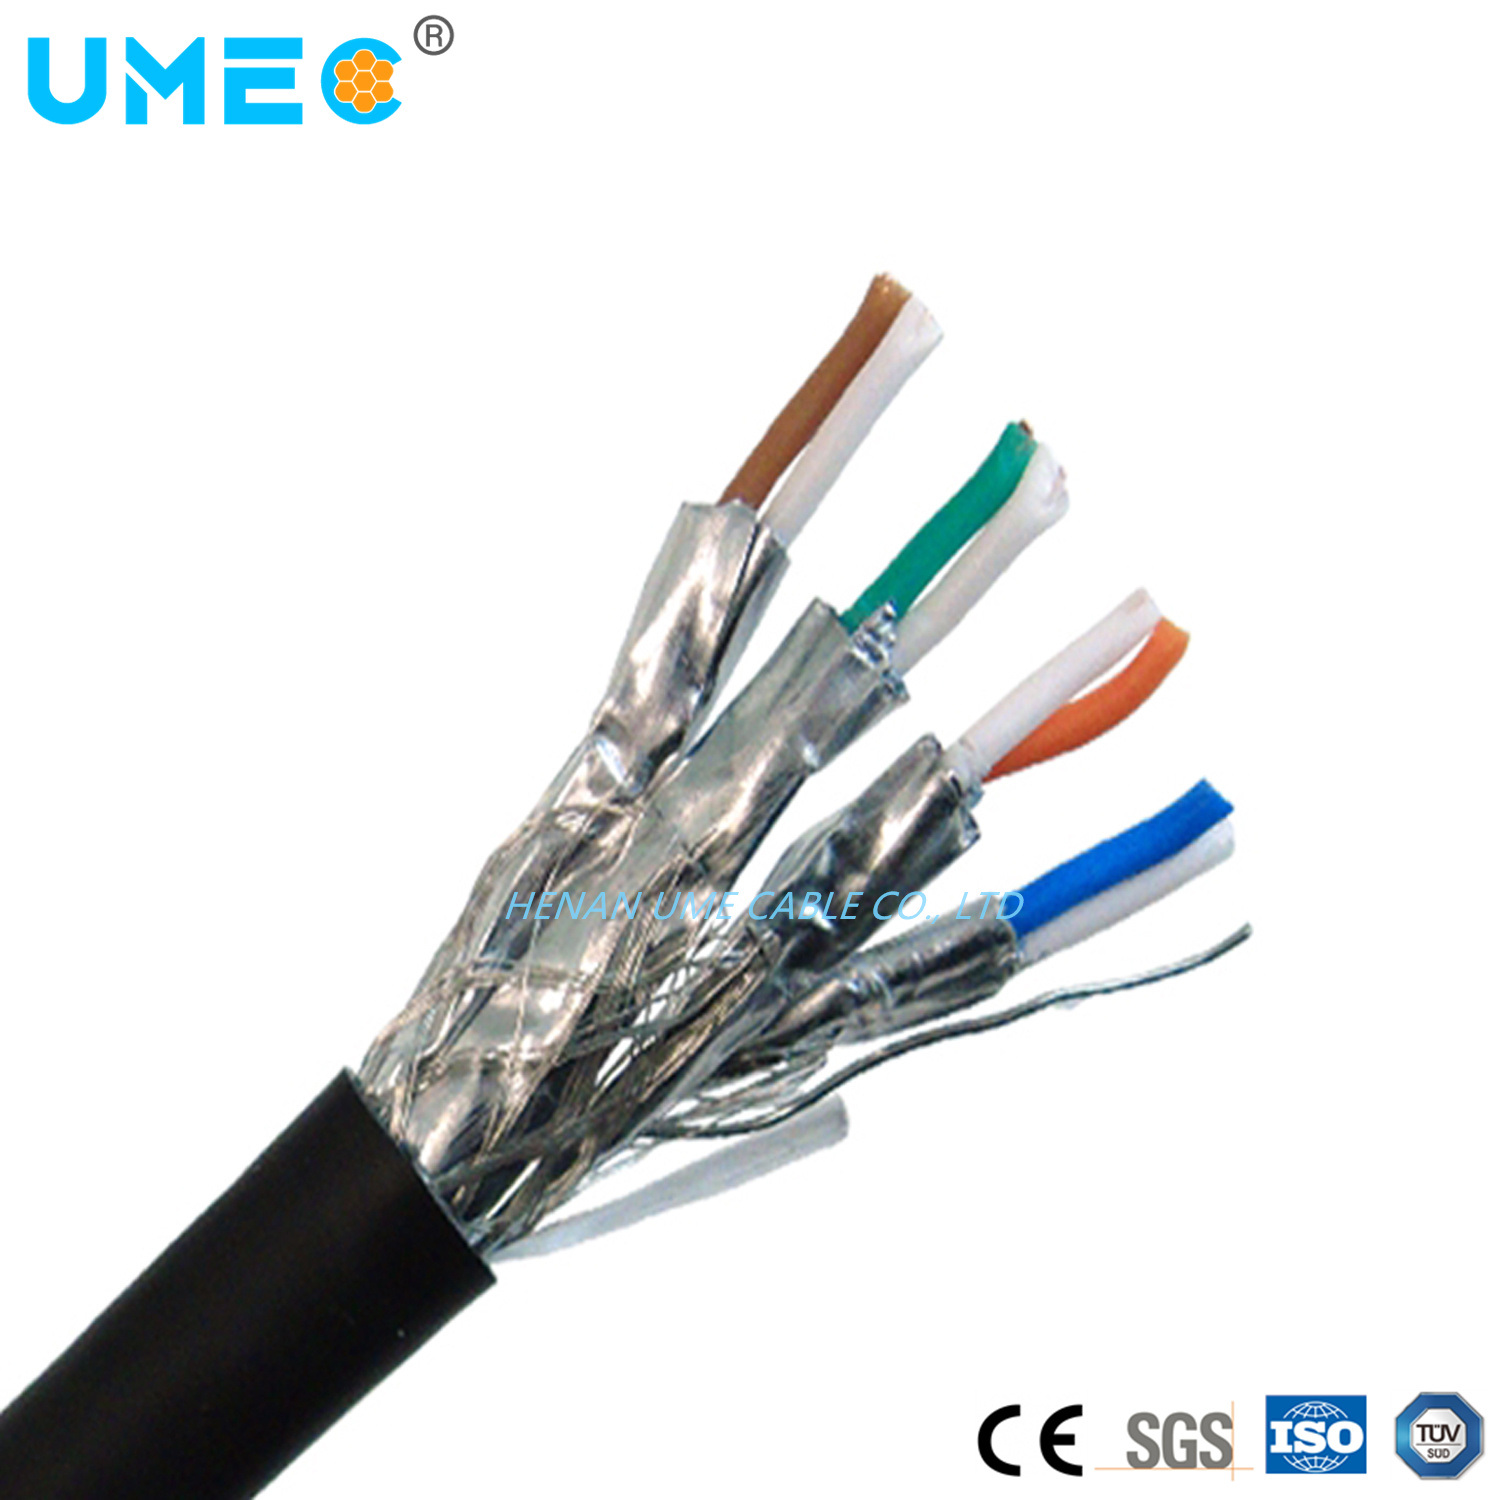 24 12 Pairs 1.5mm2 Double Shielded Twisted Pair Computer Cable Armoured Overall Screen Instrument Cable